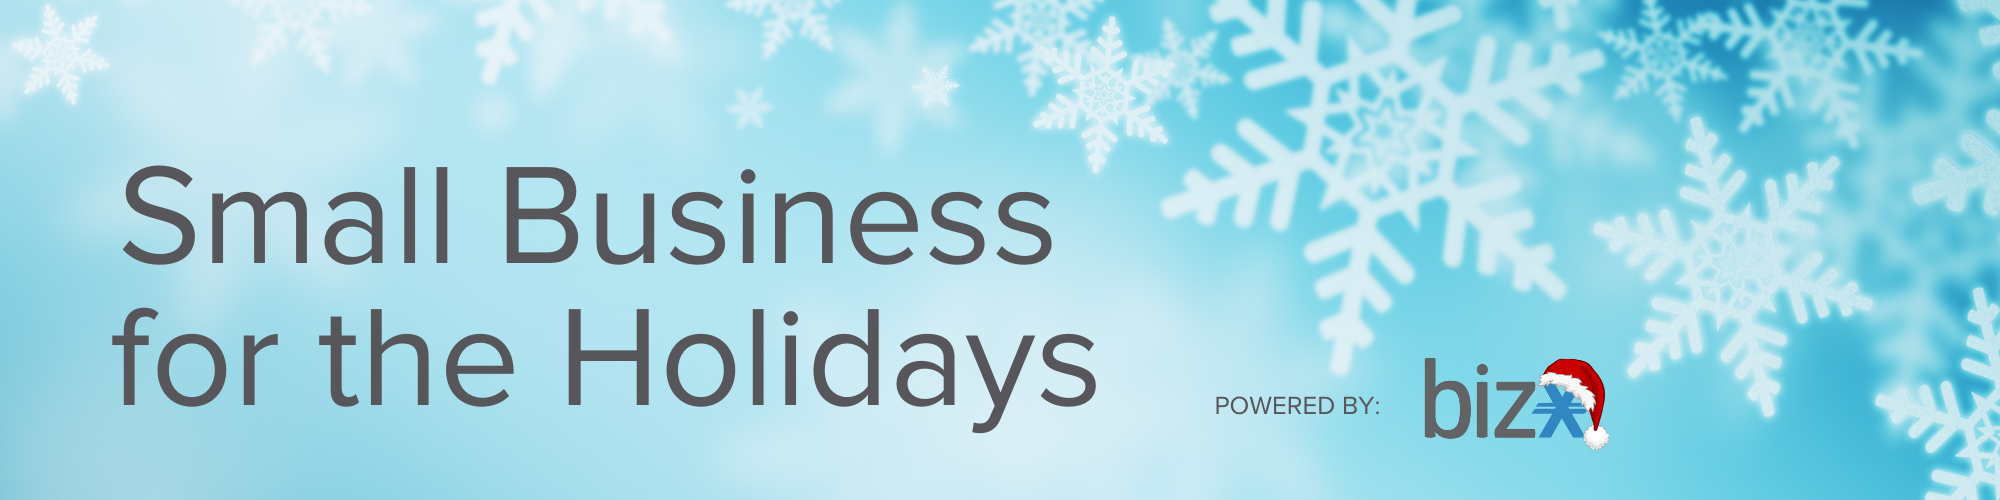 Small Business for the Holidays (2000 × 500 px)